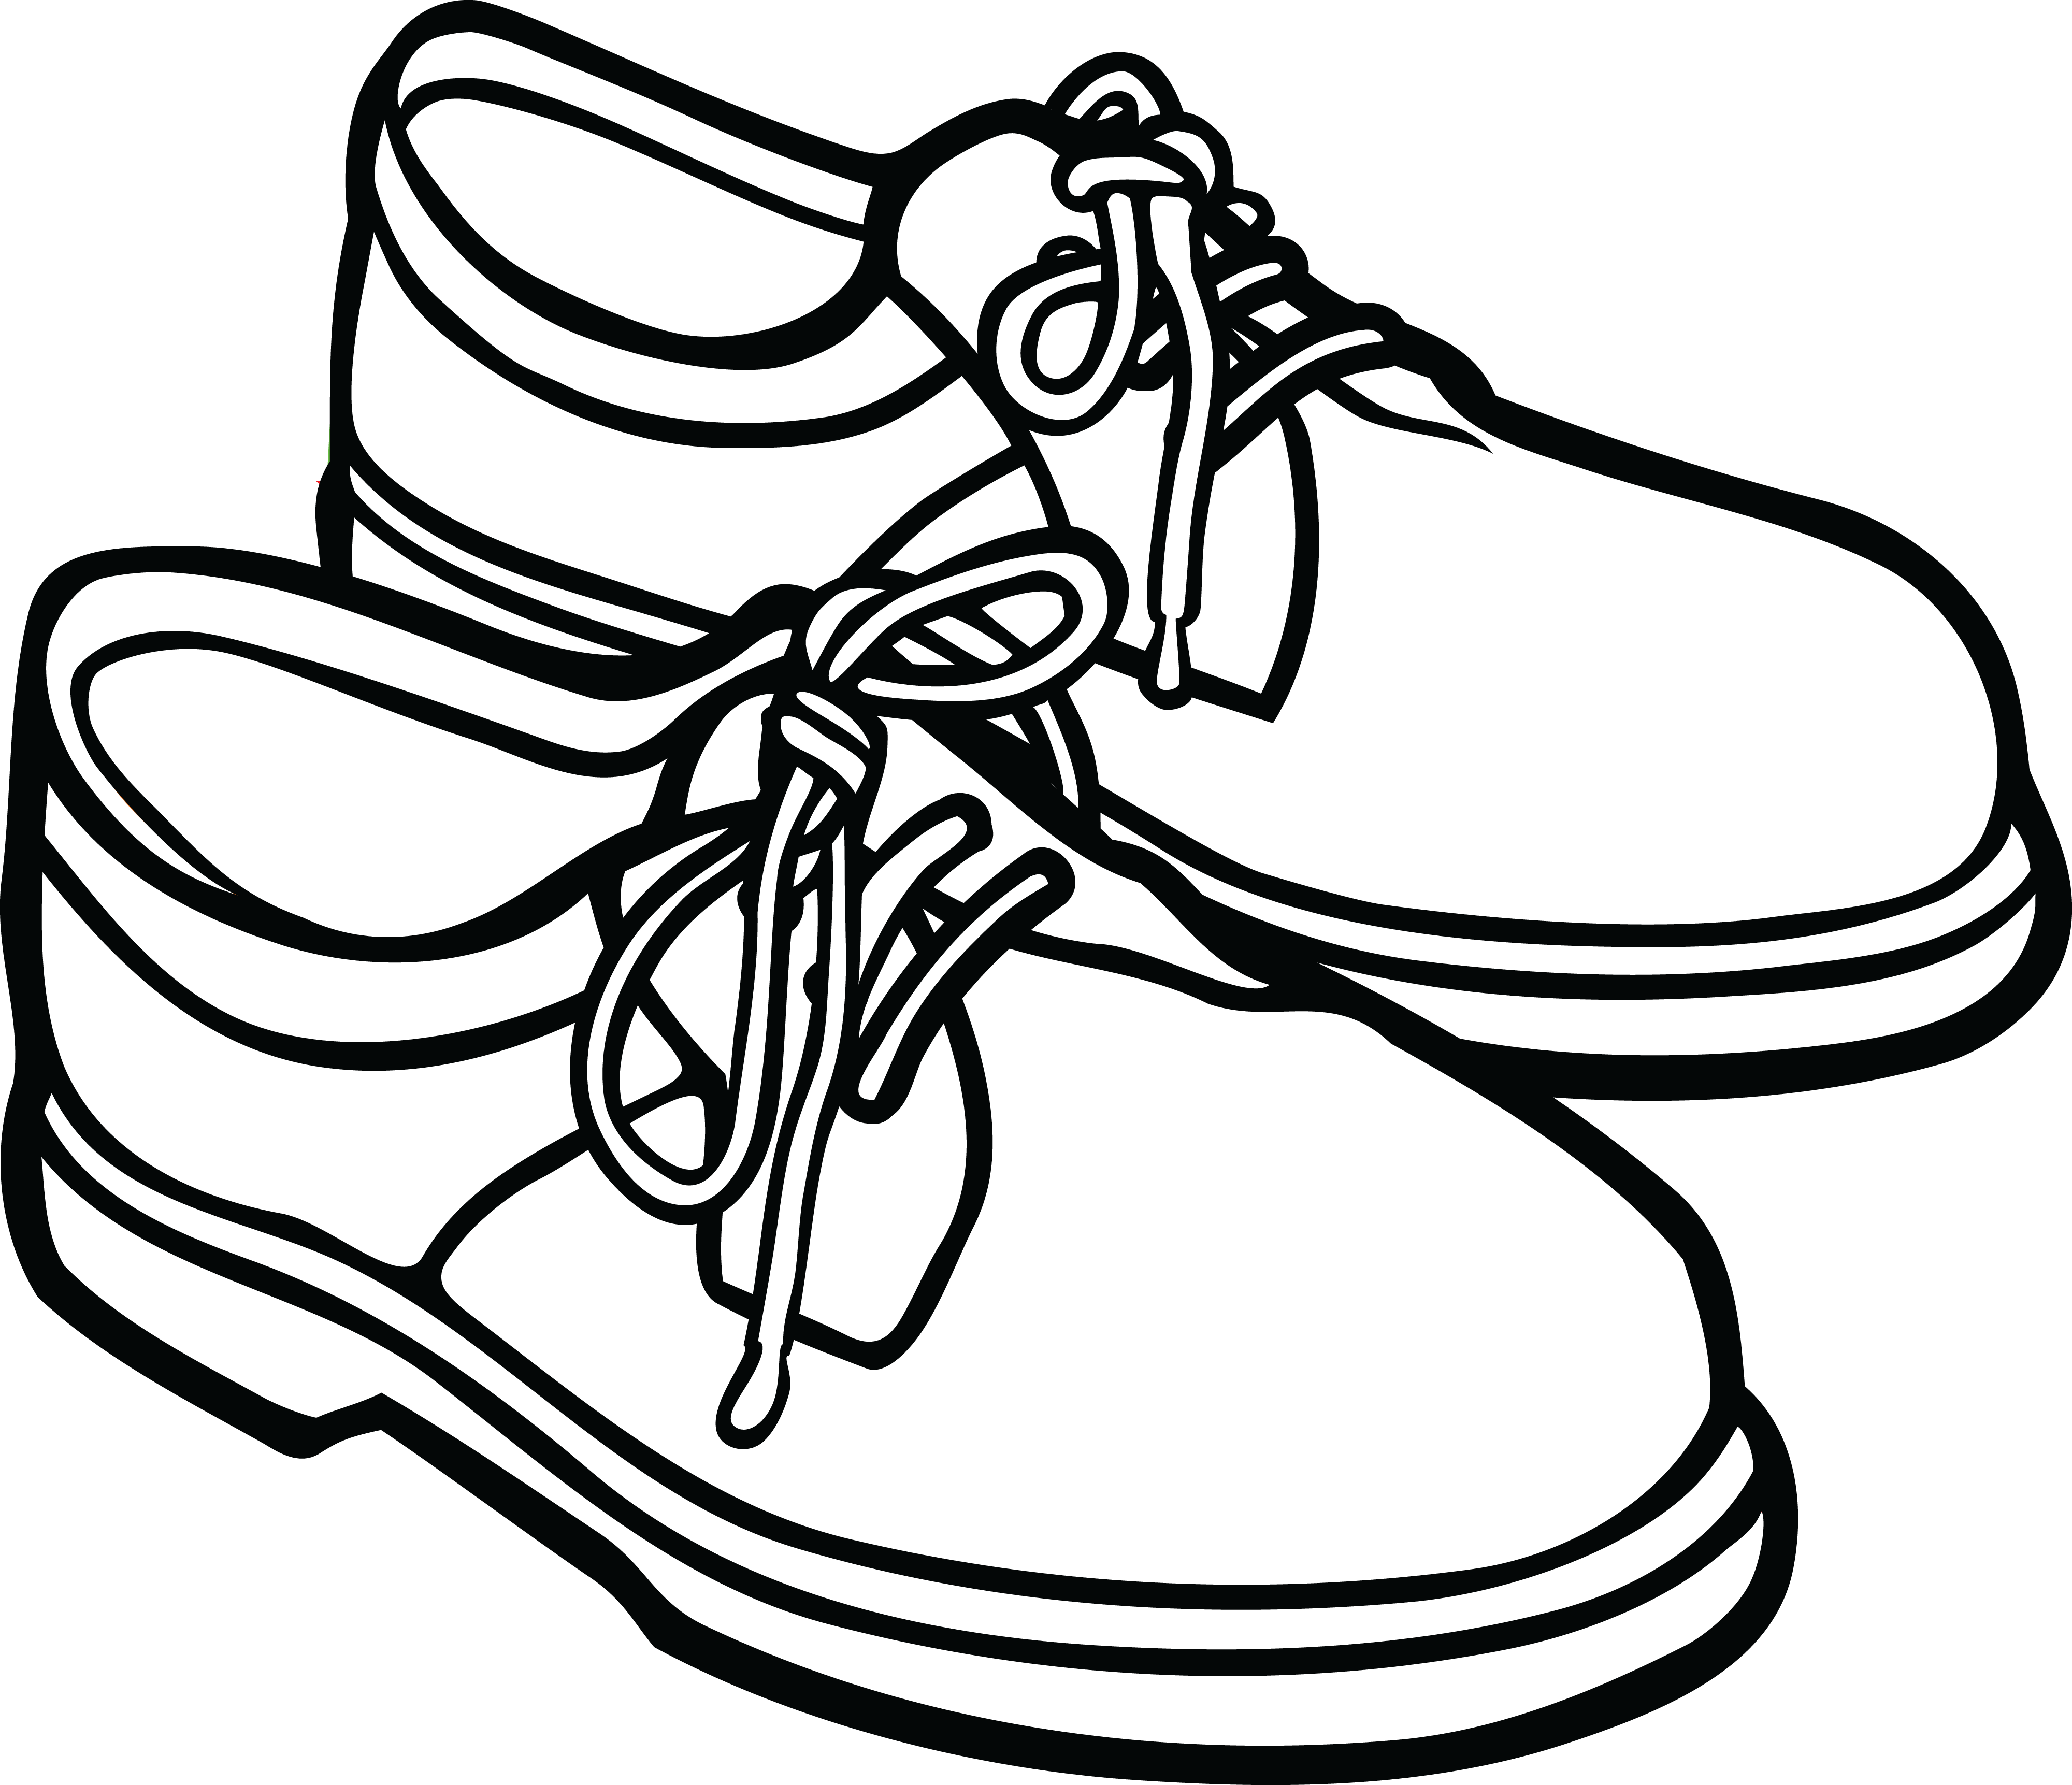 School shoes clipart black and white